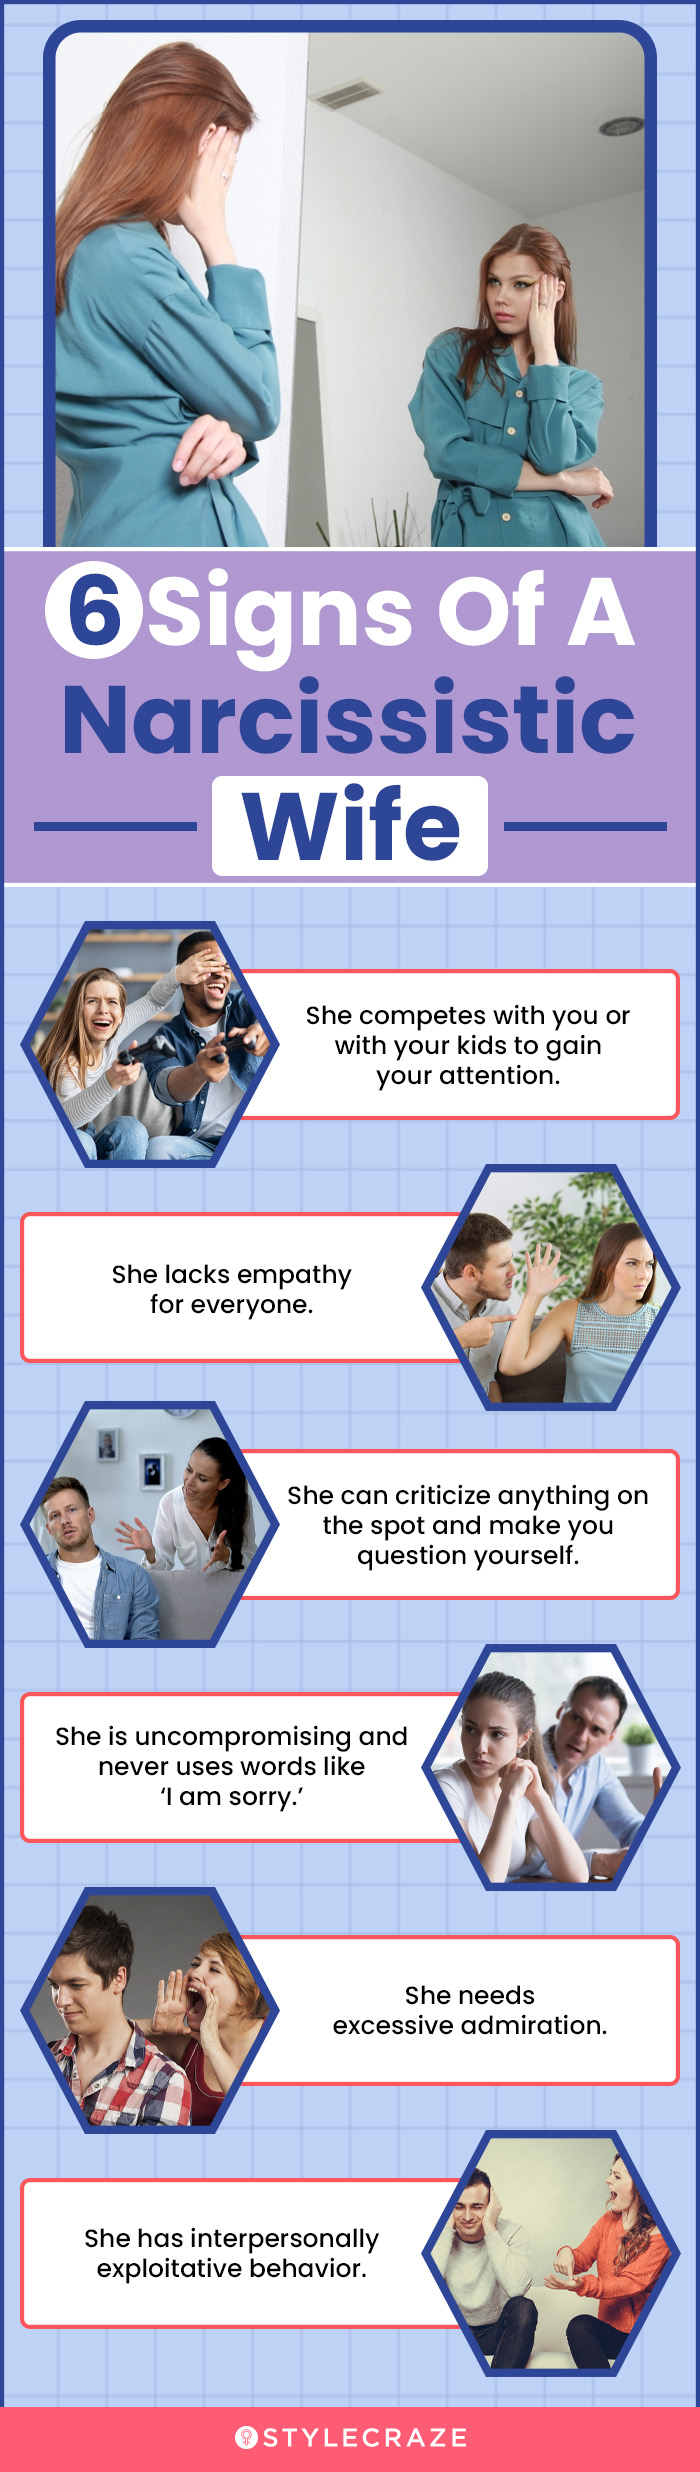 6 signs of a narcissistic wife (infographic)